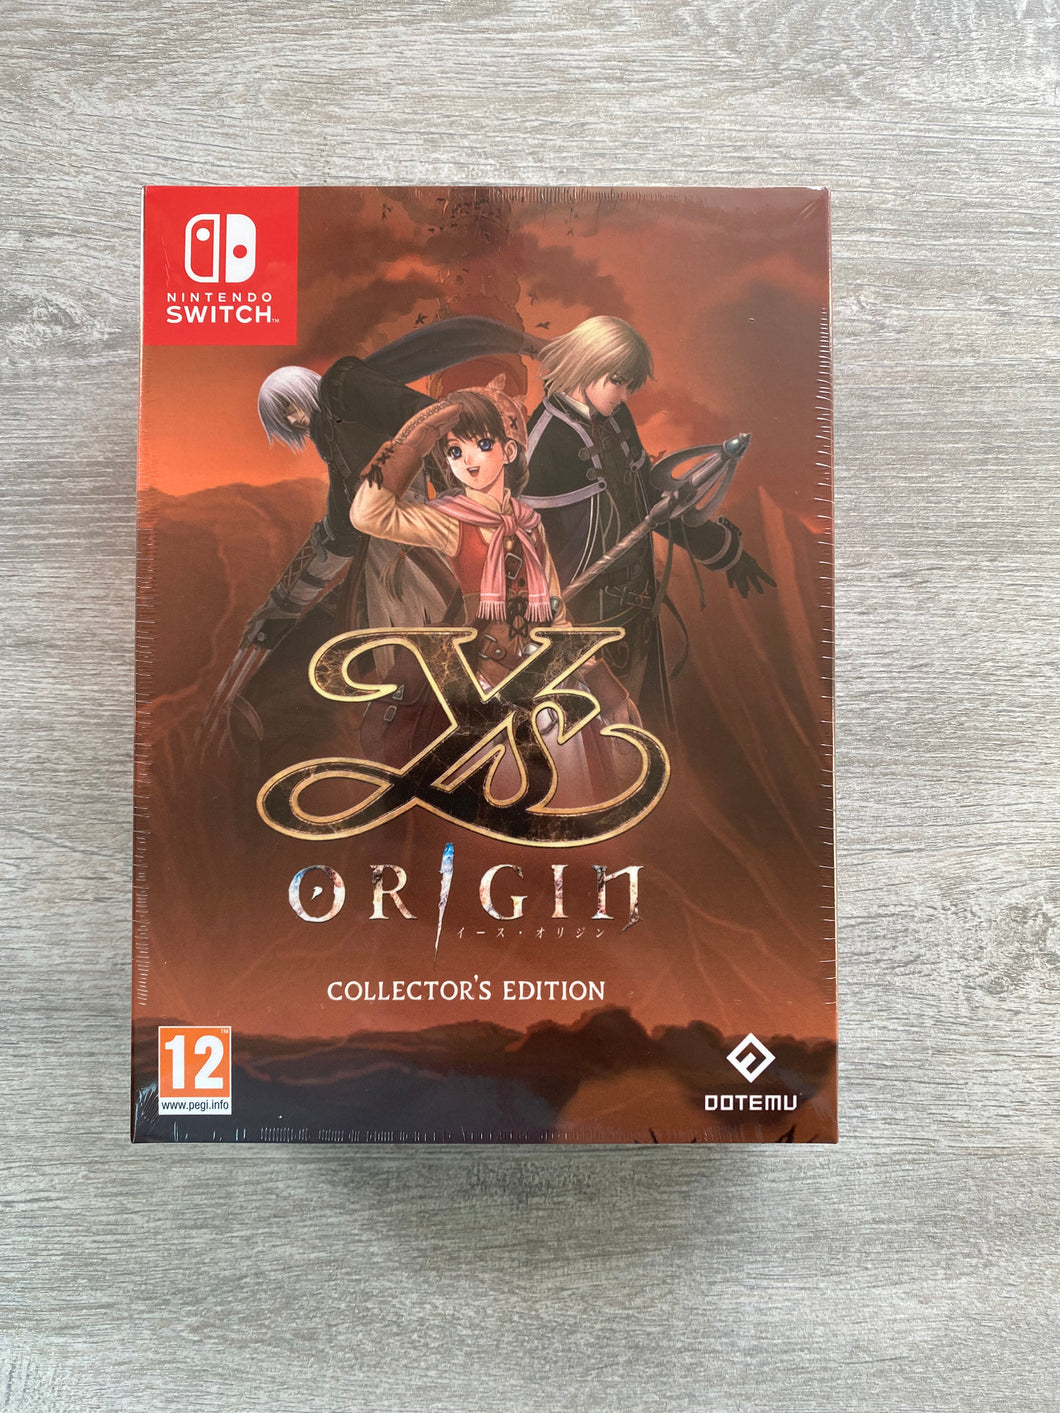 Ys origin Collector’s edition / Strictly limited games / Switch / 3000 copies